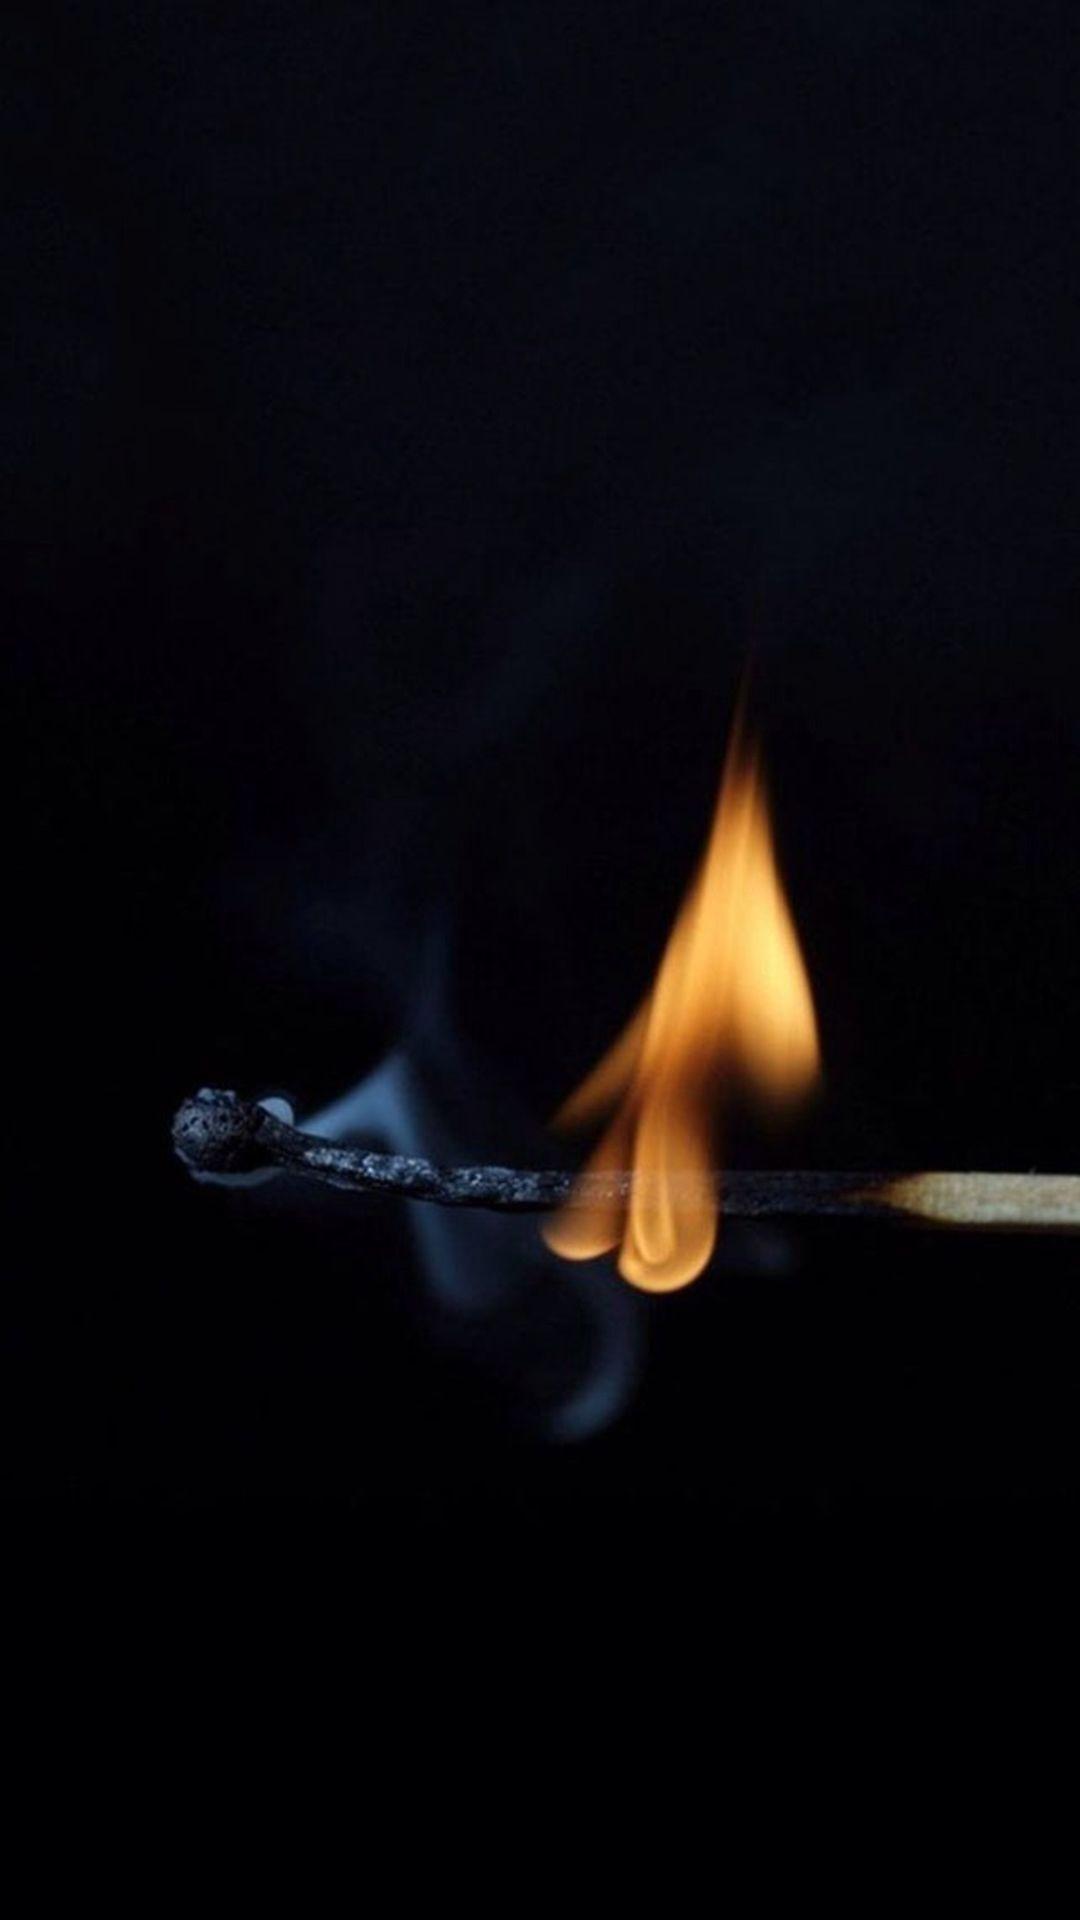 Abstract Simple Burning Match Ash iPhone 6 wallpaper. wallpaper